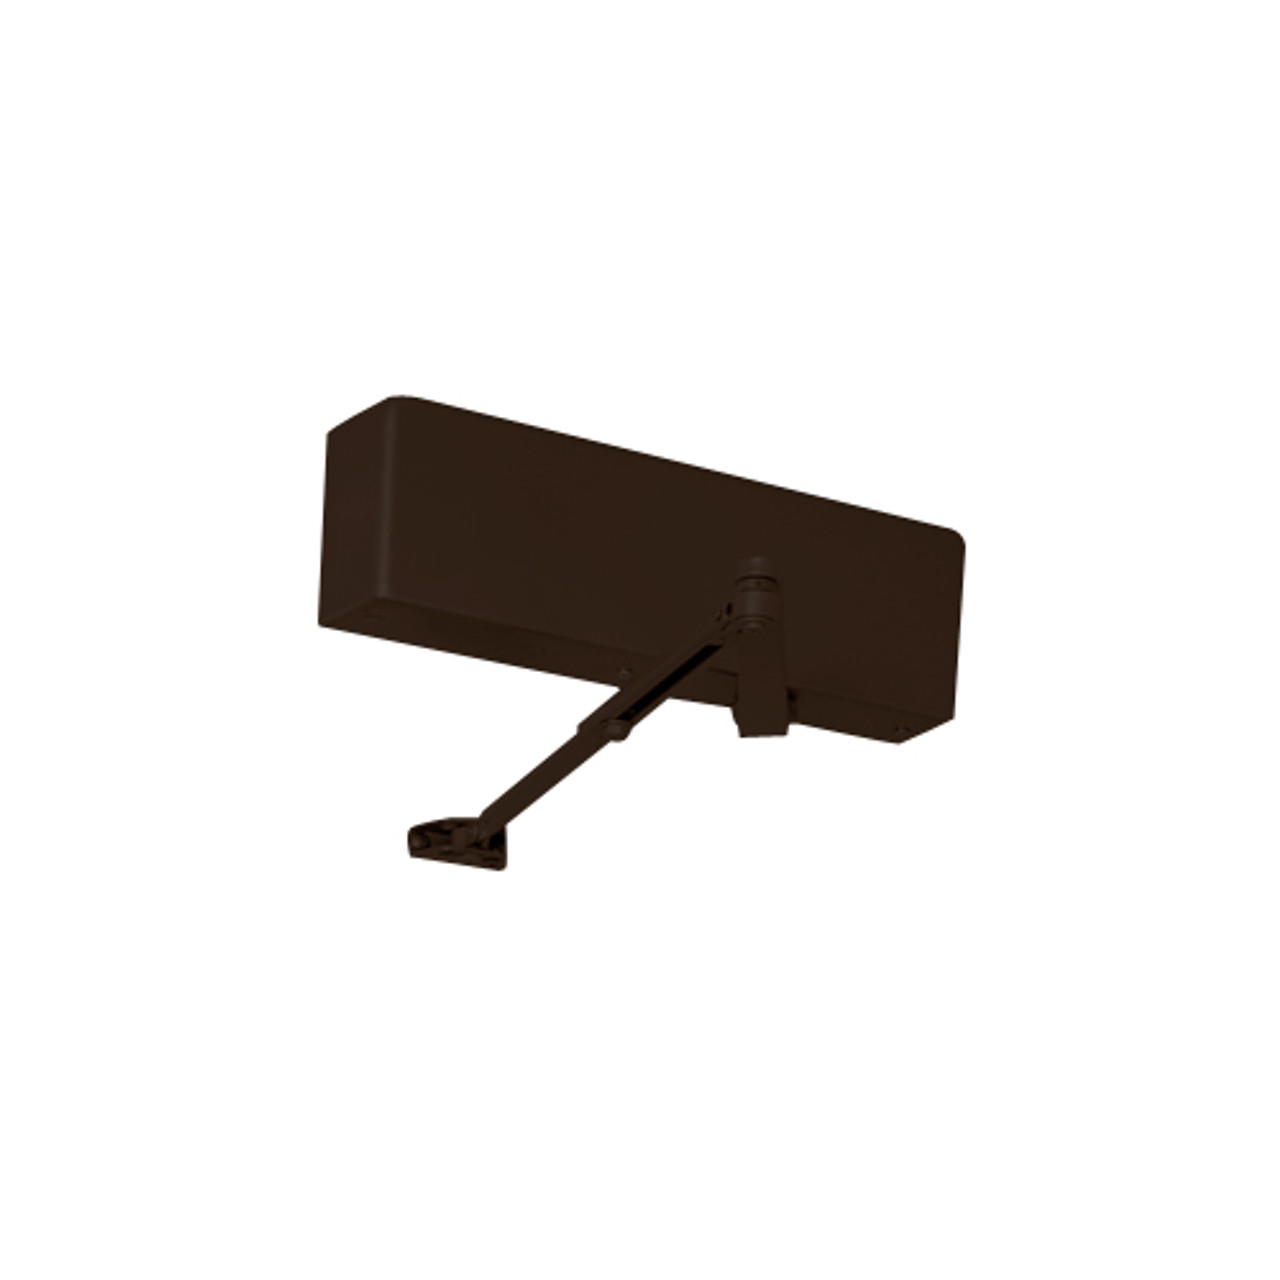 JL7500HM-690 Norton 7500 Series Hold Open Institutional Door Closer with Top Jamb Only Reveals 2-3/4 to 6-3/4 inch to 180 Degree in Statuary Bronze Finish